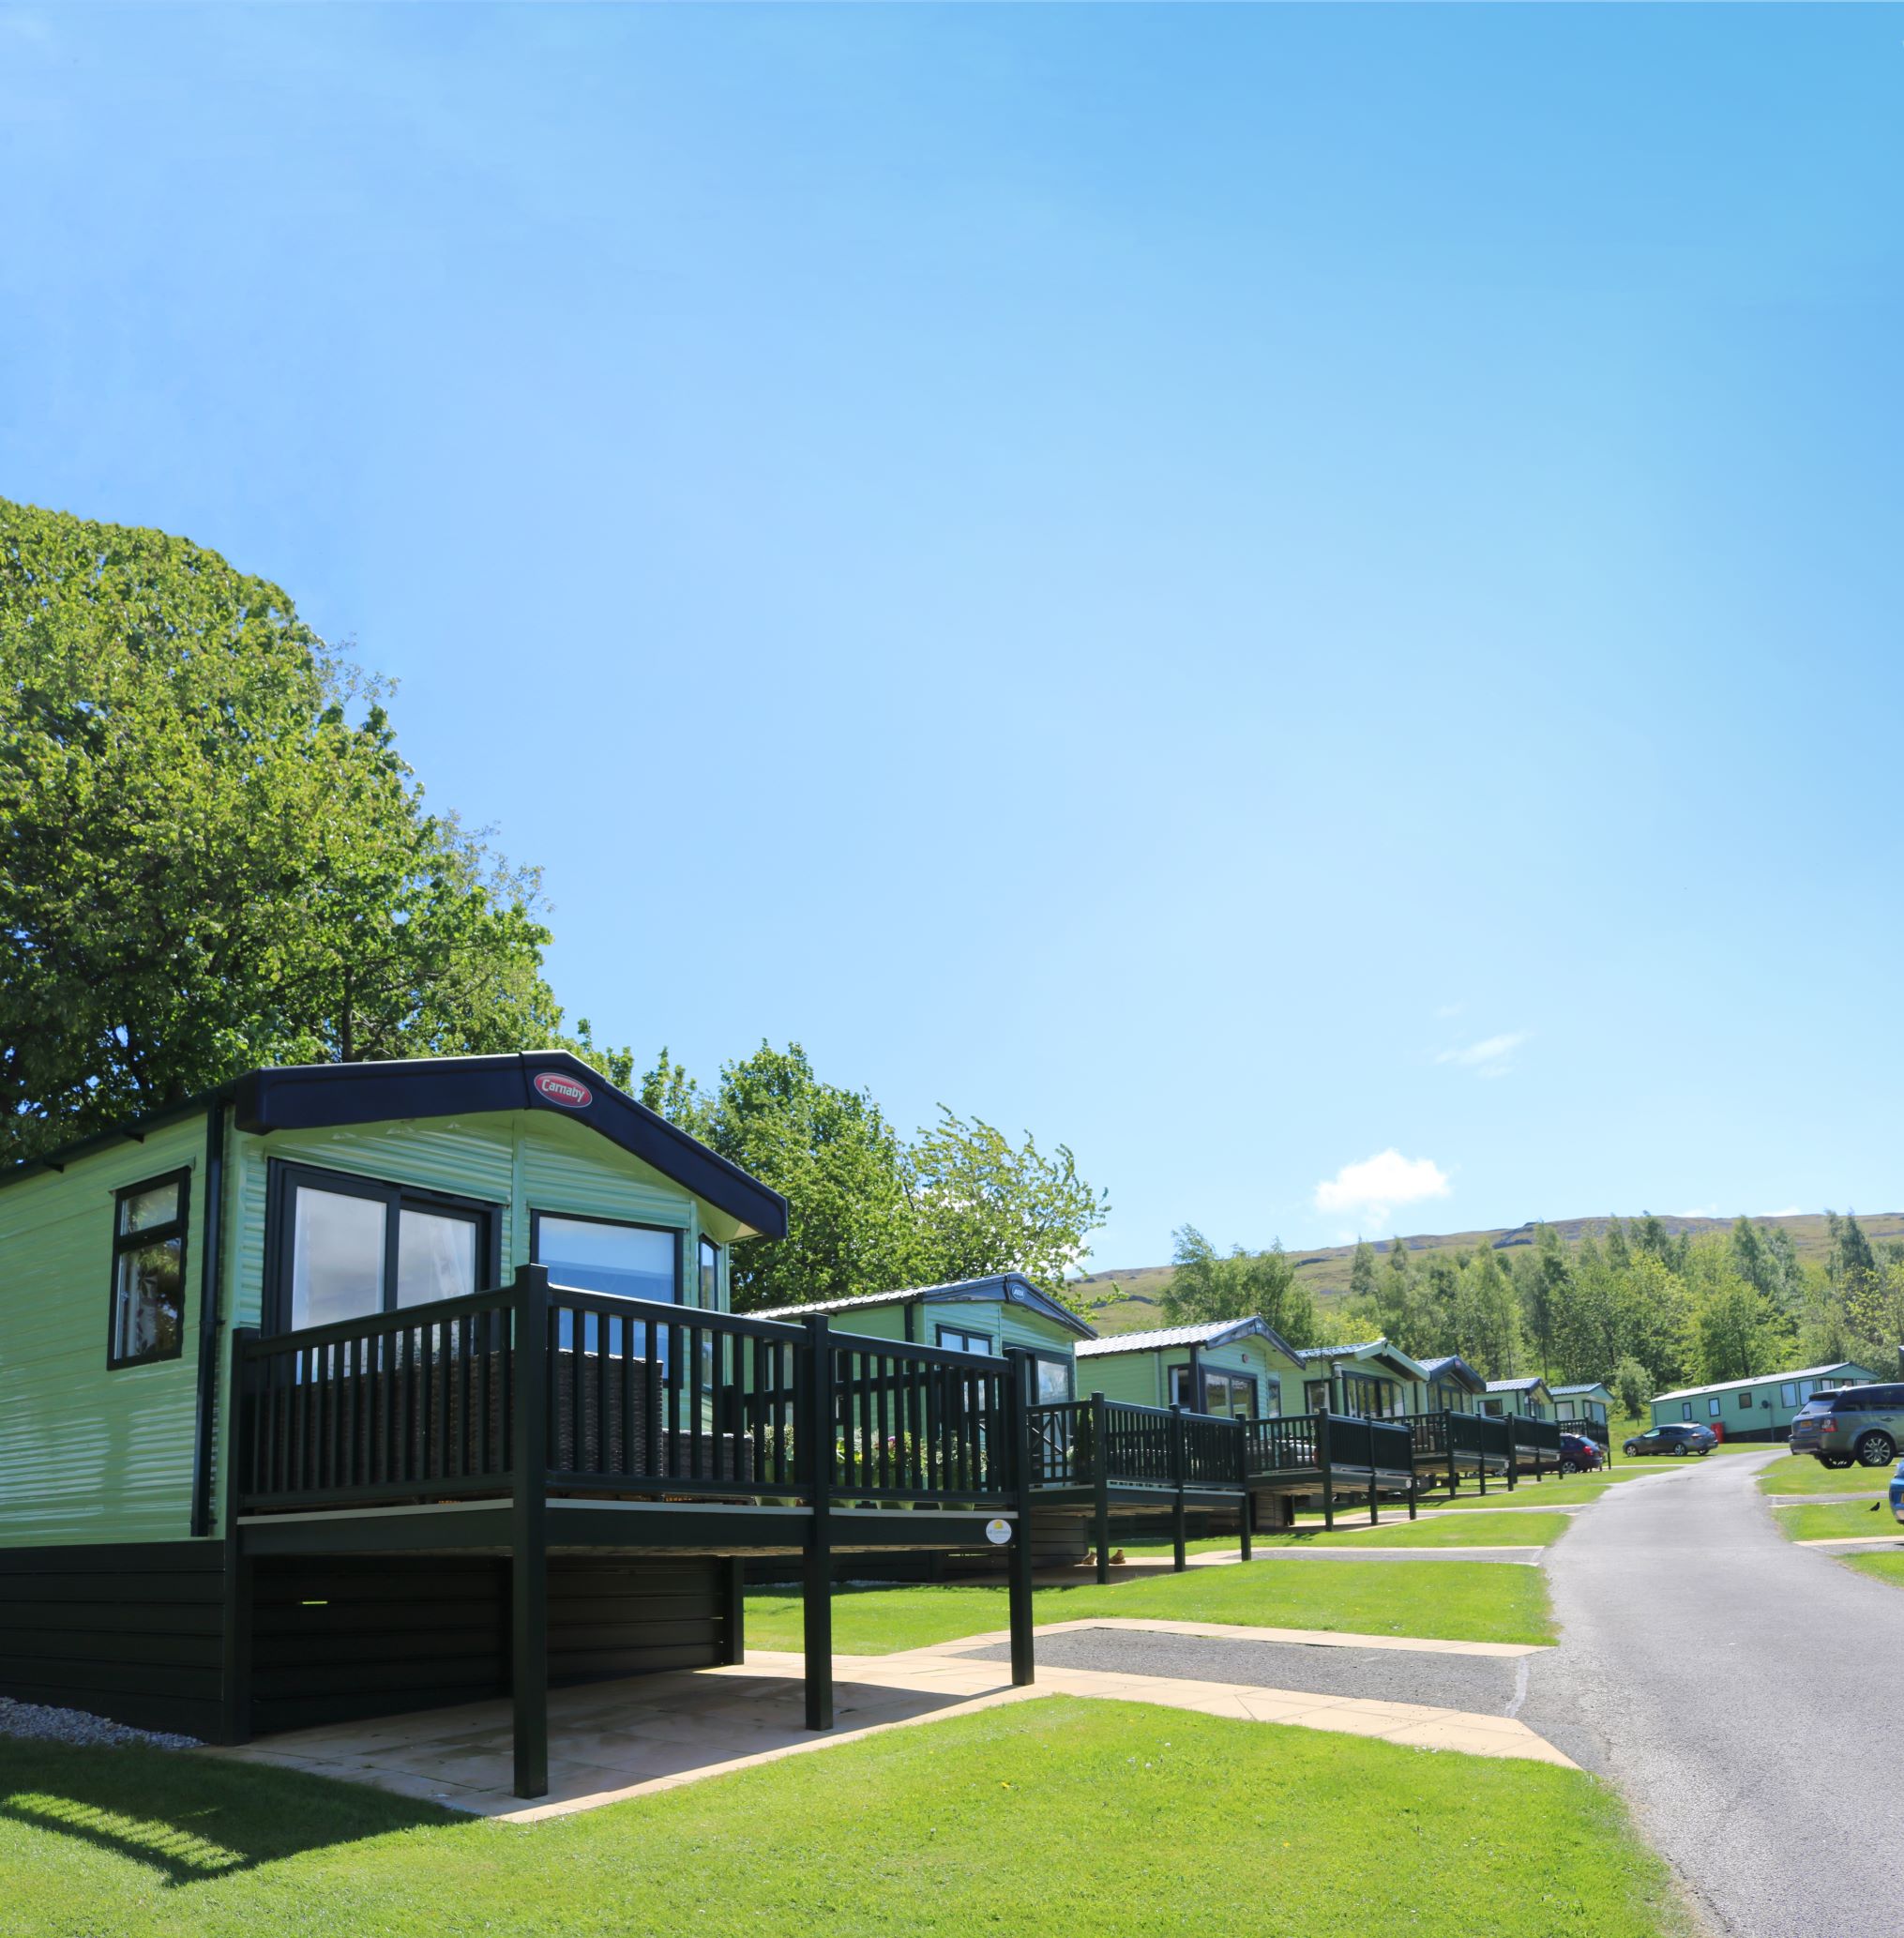 Littondale - Holiday Park & Holiday Homes - Park Leisure Skipton 01756 632932